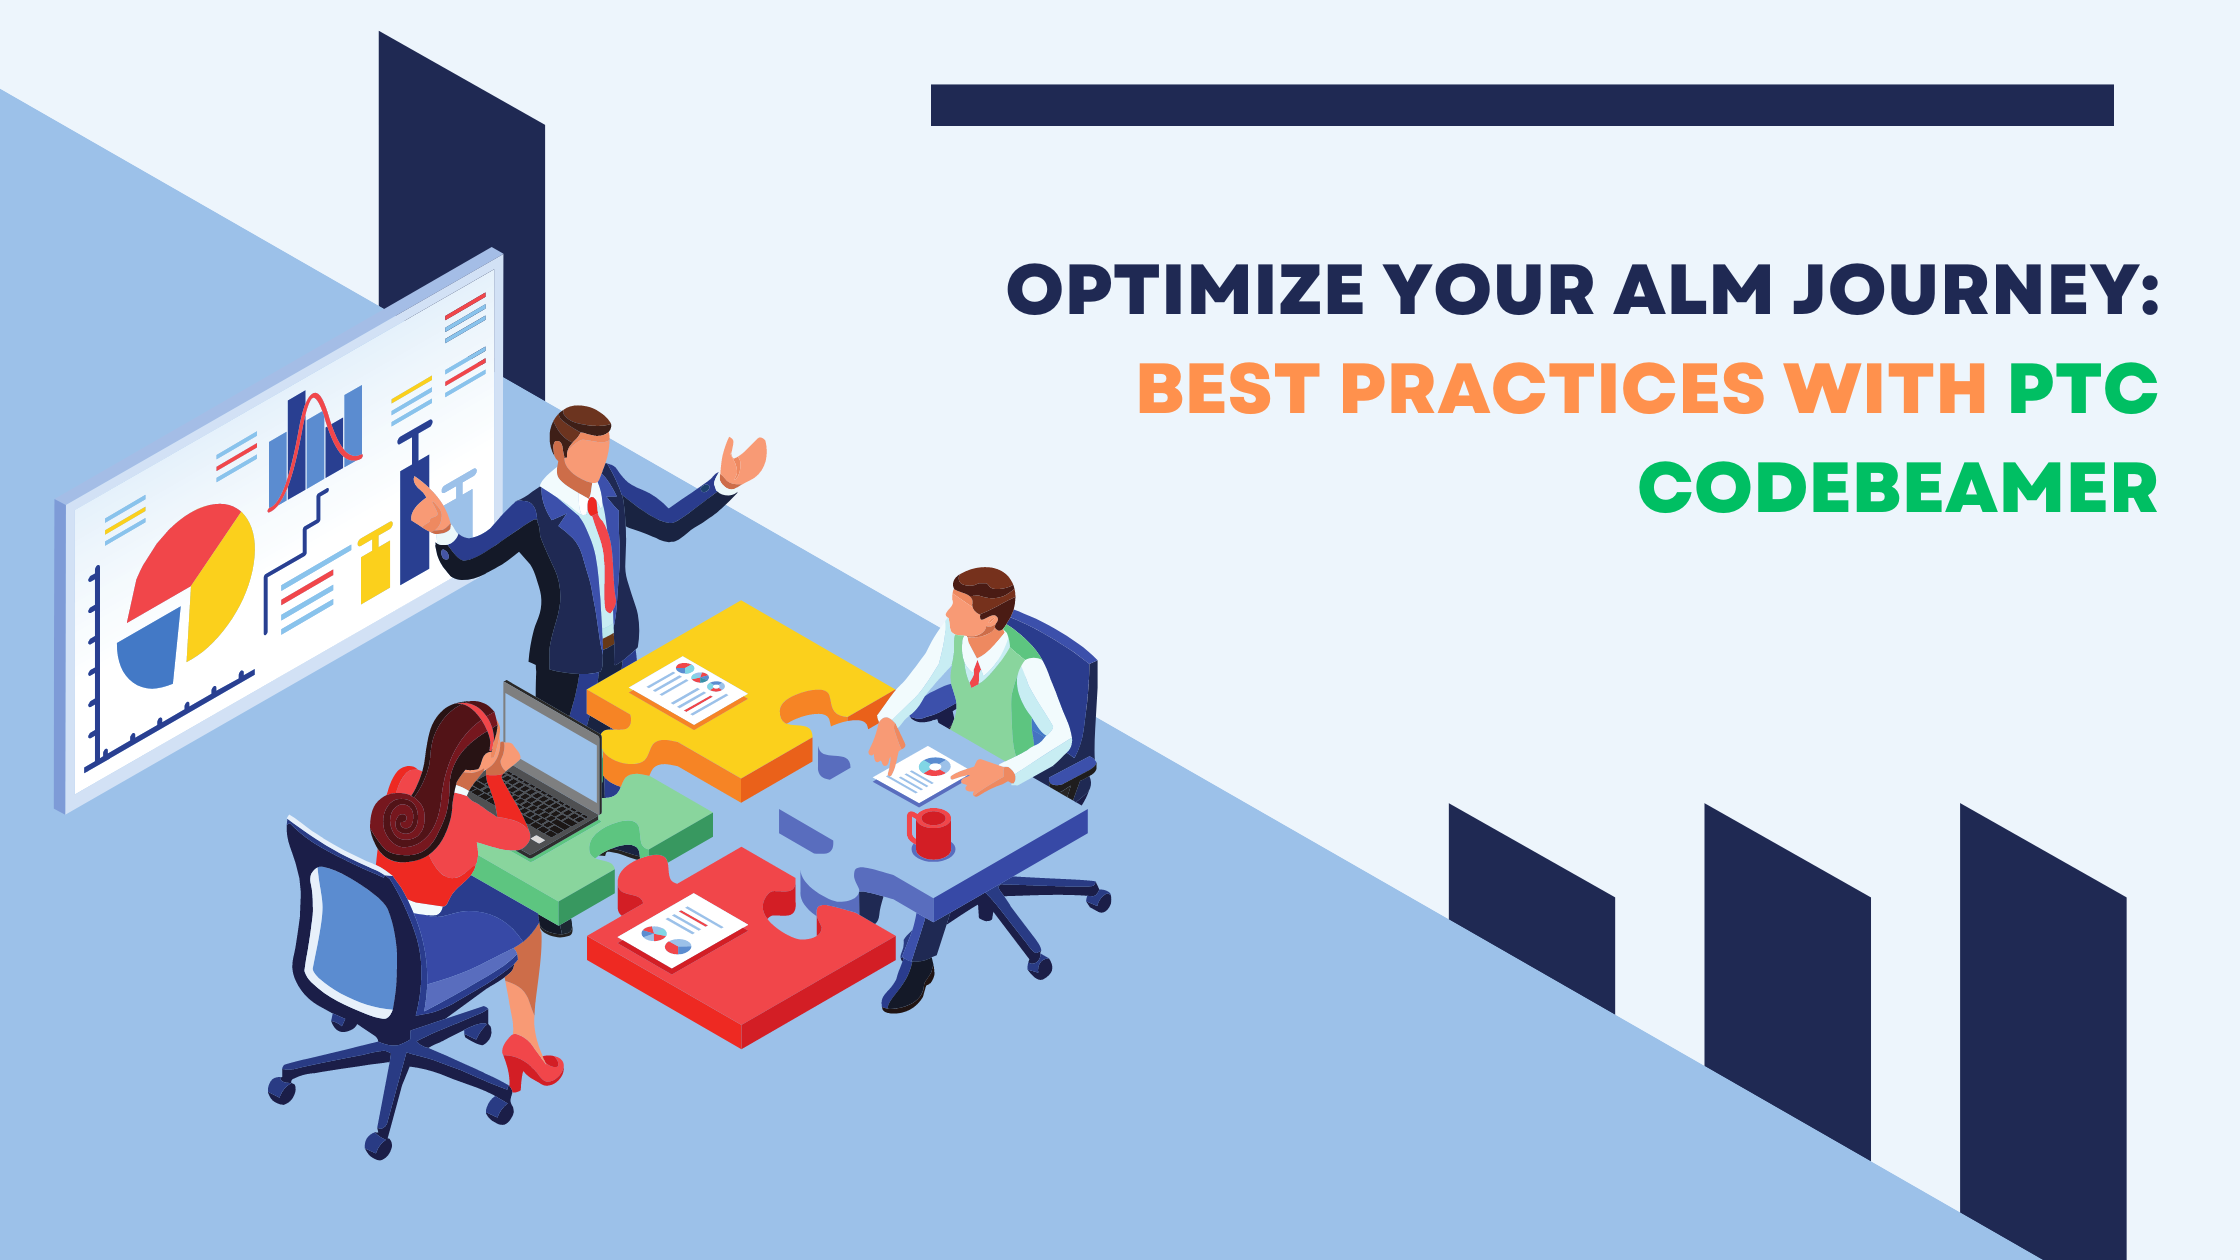 Optimize-Your-ALM-Journey-Best-Practices-with-PTC-CodeBeamer.